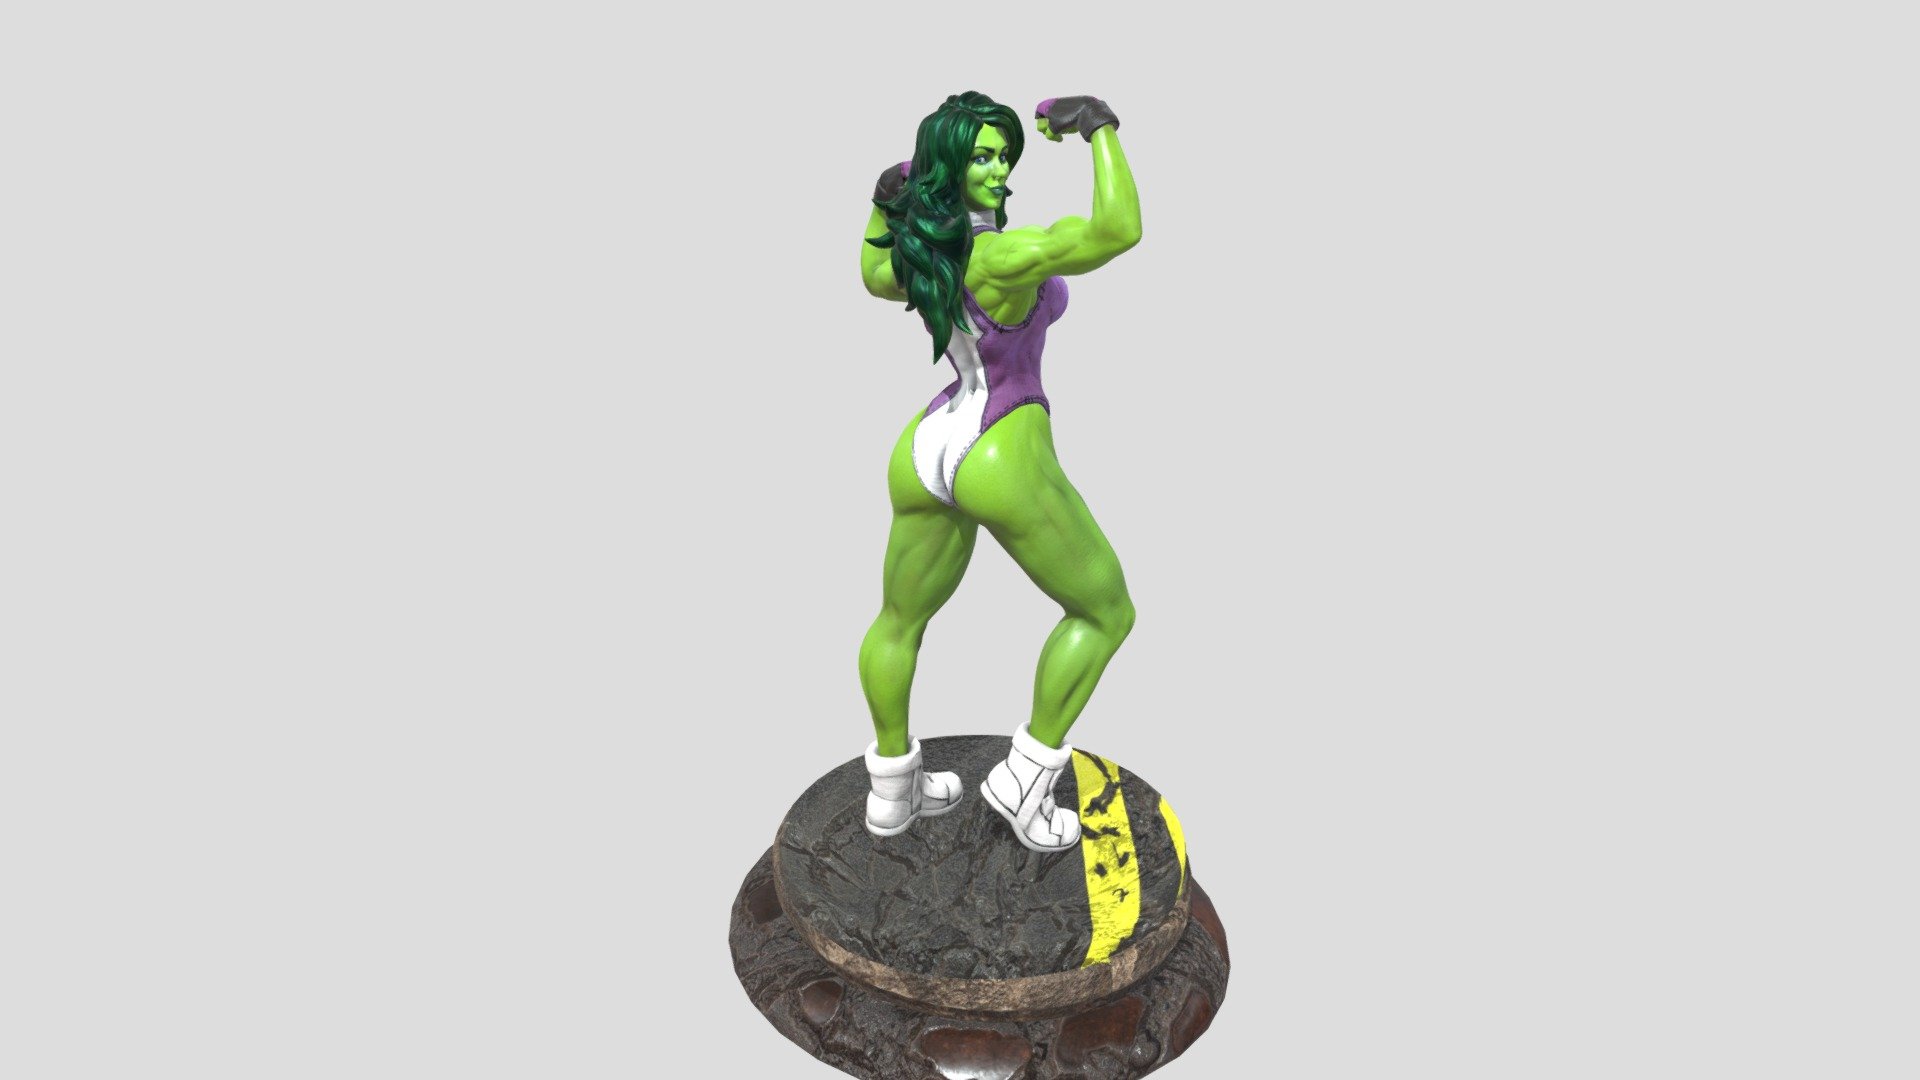 She hulk miniature, sculpting in zbrush, texture in substance painter 3d model